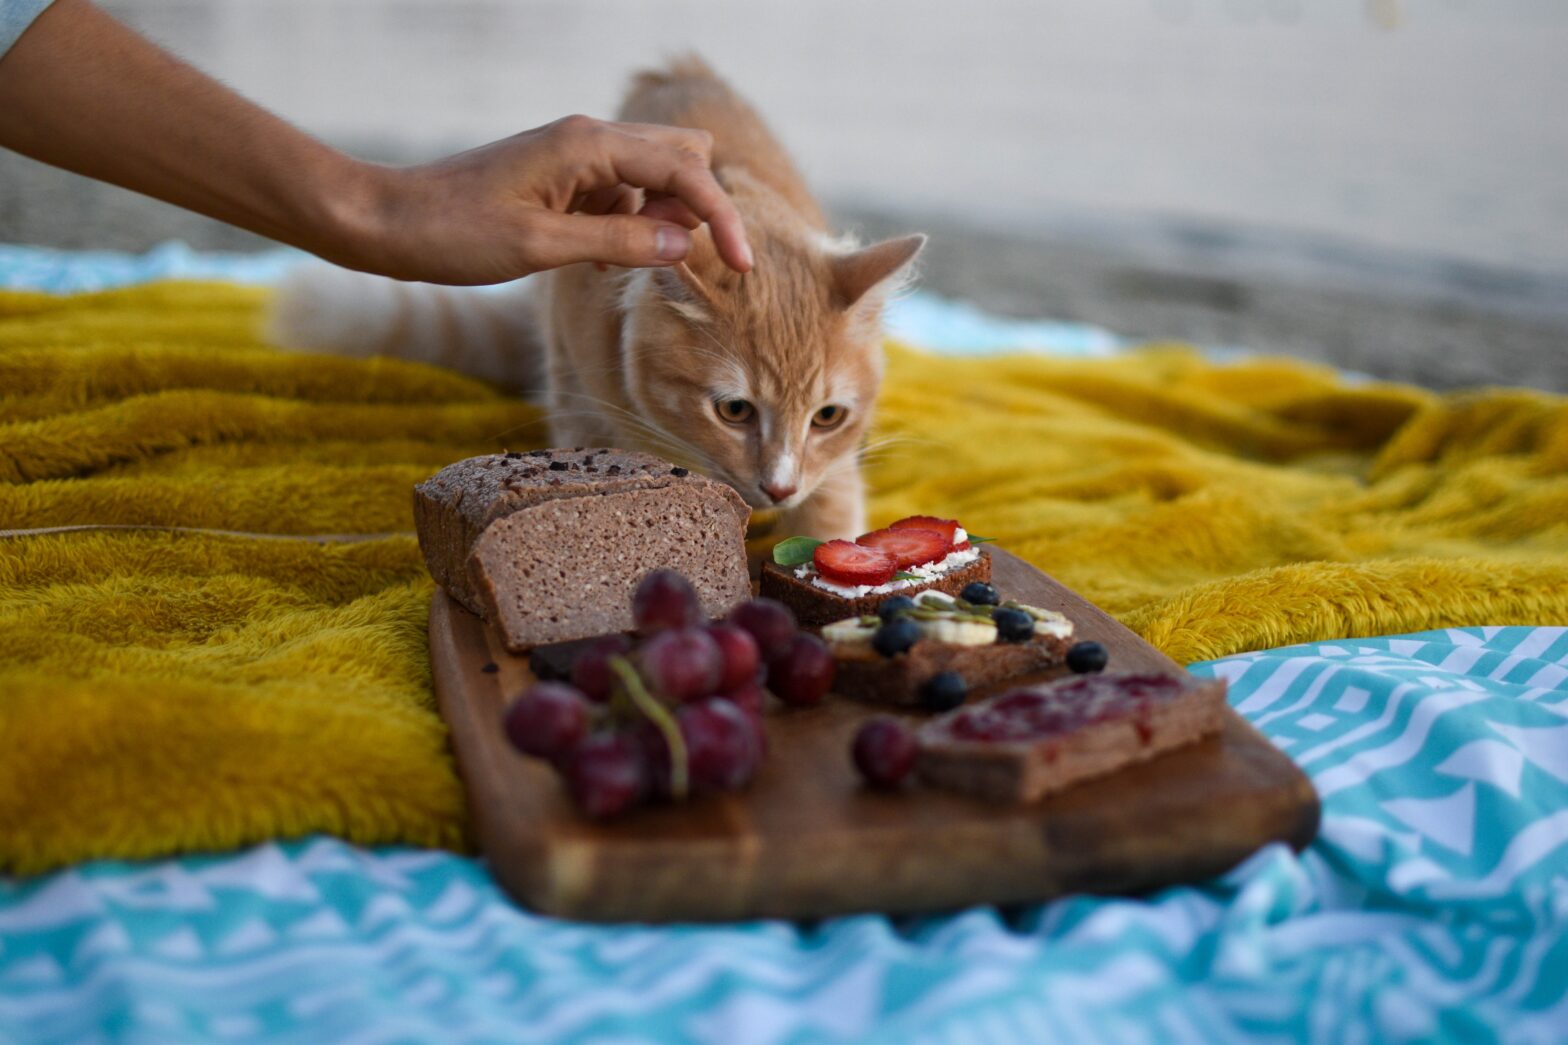 Purr-fectly Delicious: Cat-Inspired Food FEASTival to Delight NYC Foodies